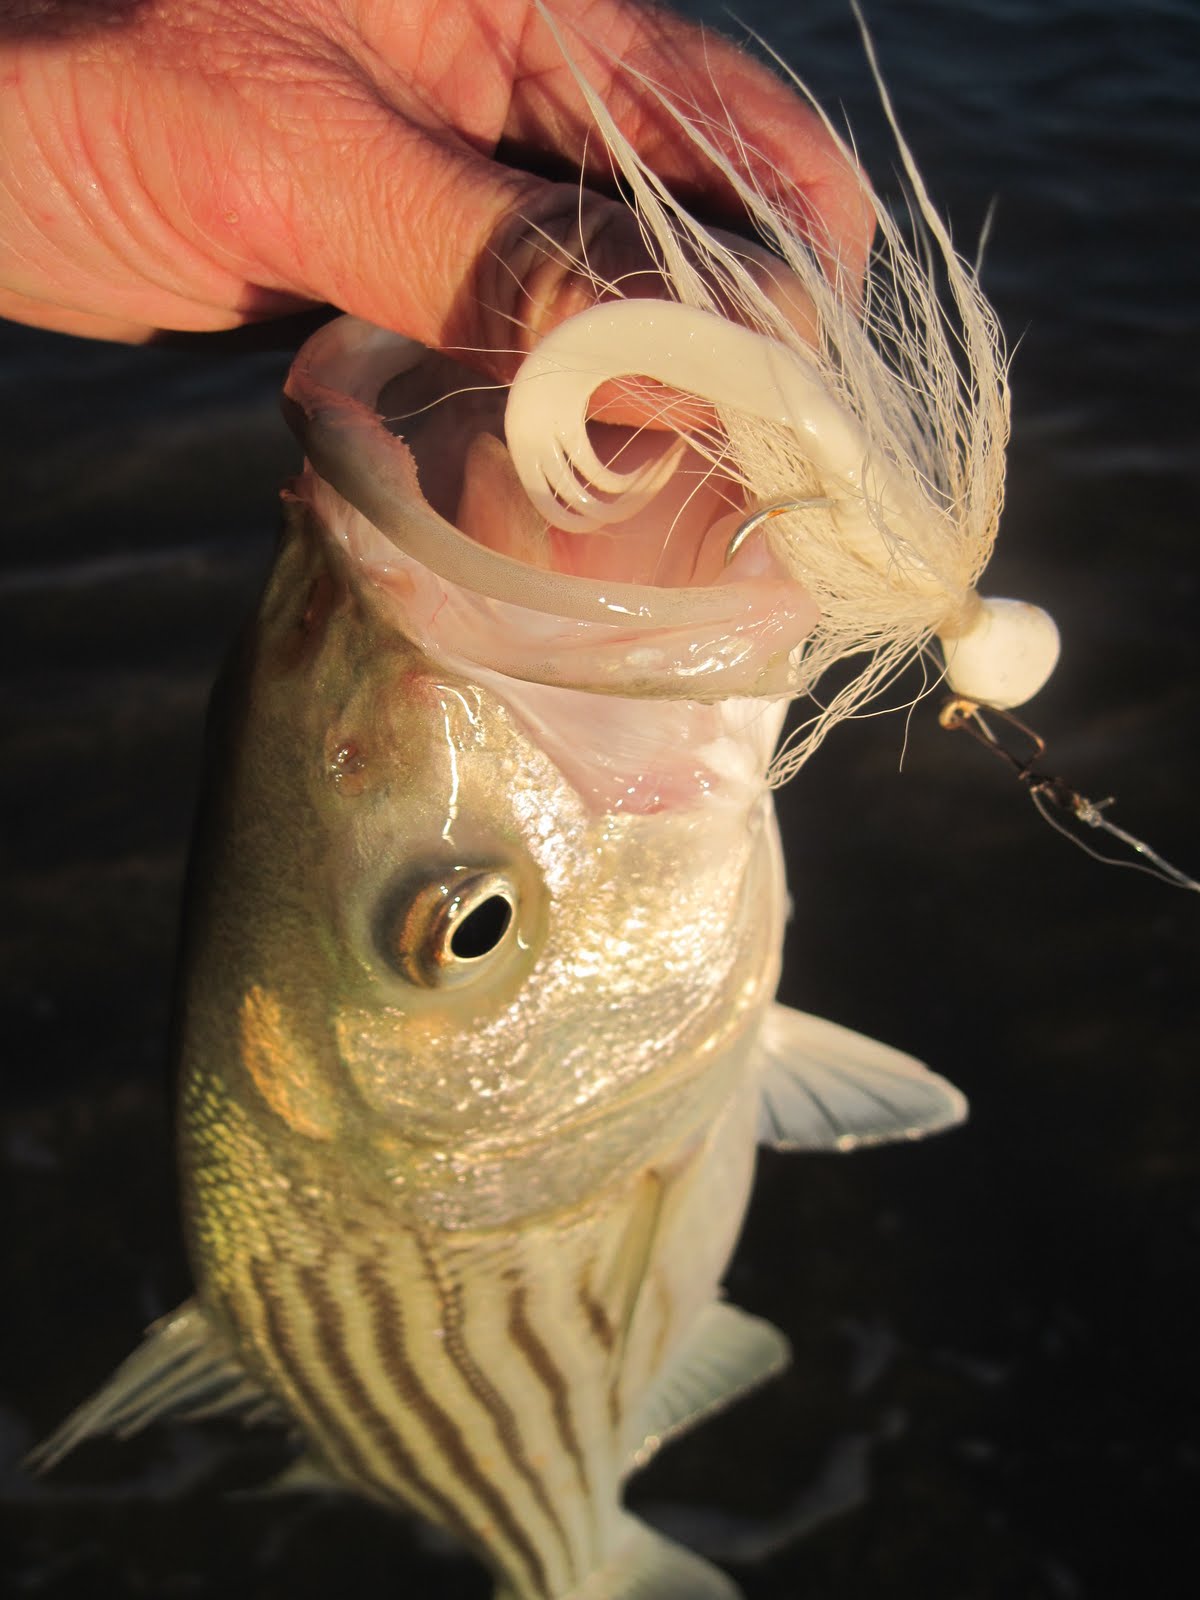 Rhode Island Striped Bass: Top 5 Lures for September